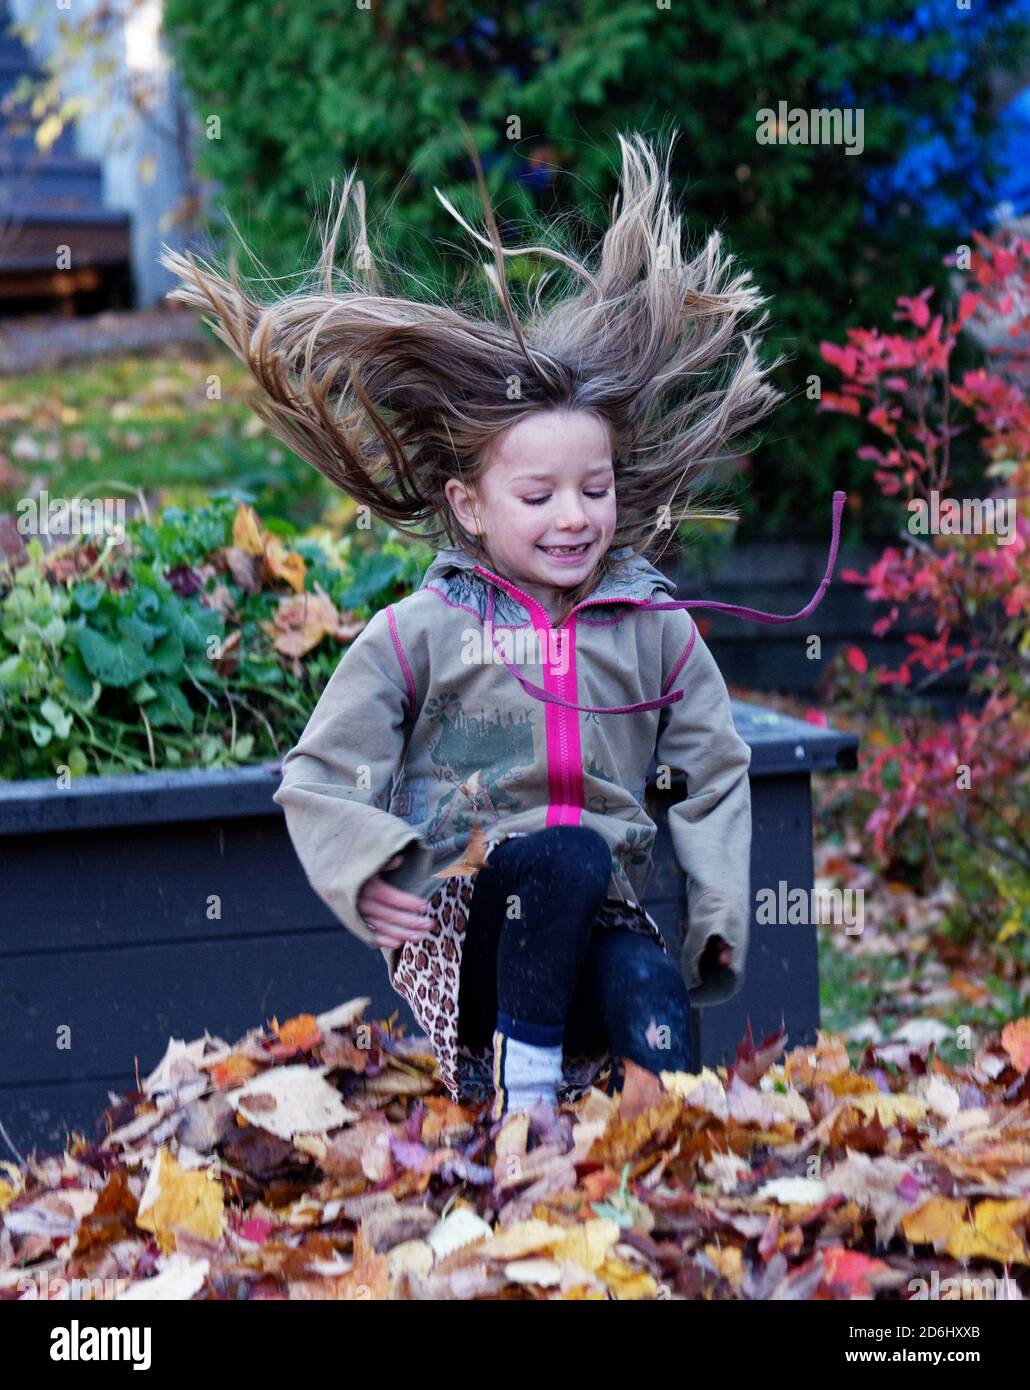 A 6 year old girl, jumping into a pile of autumn leaves Stock Photo